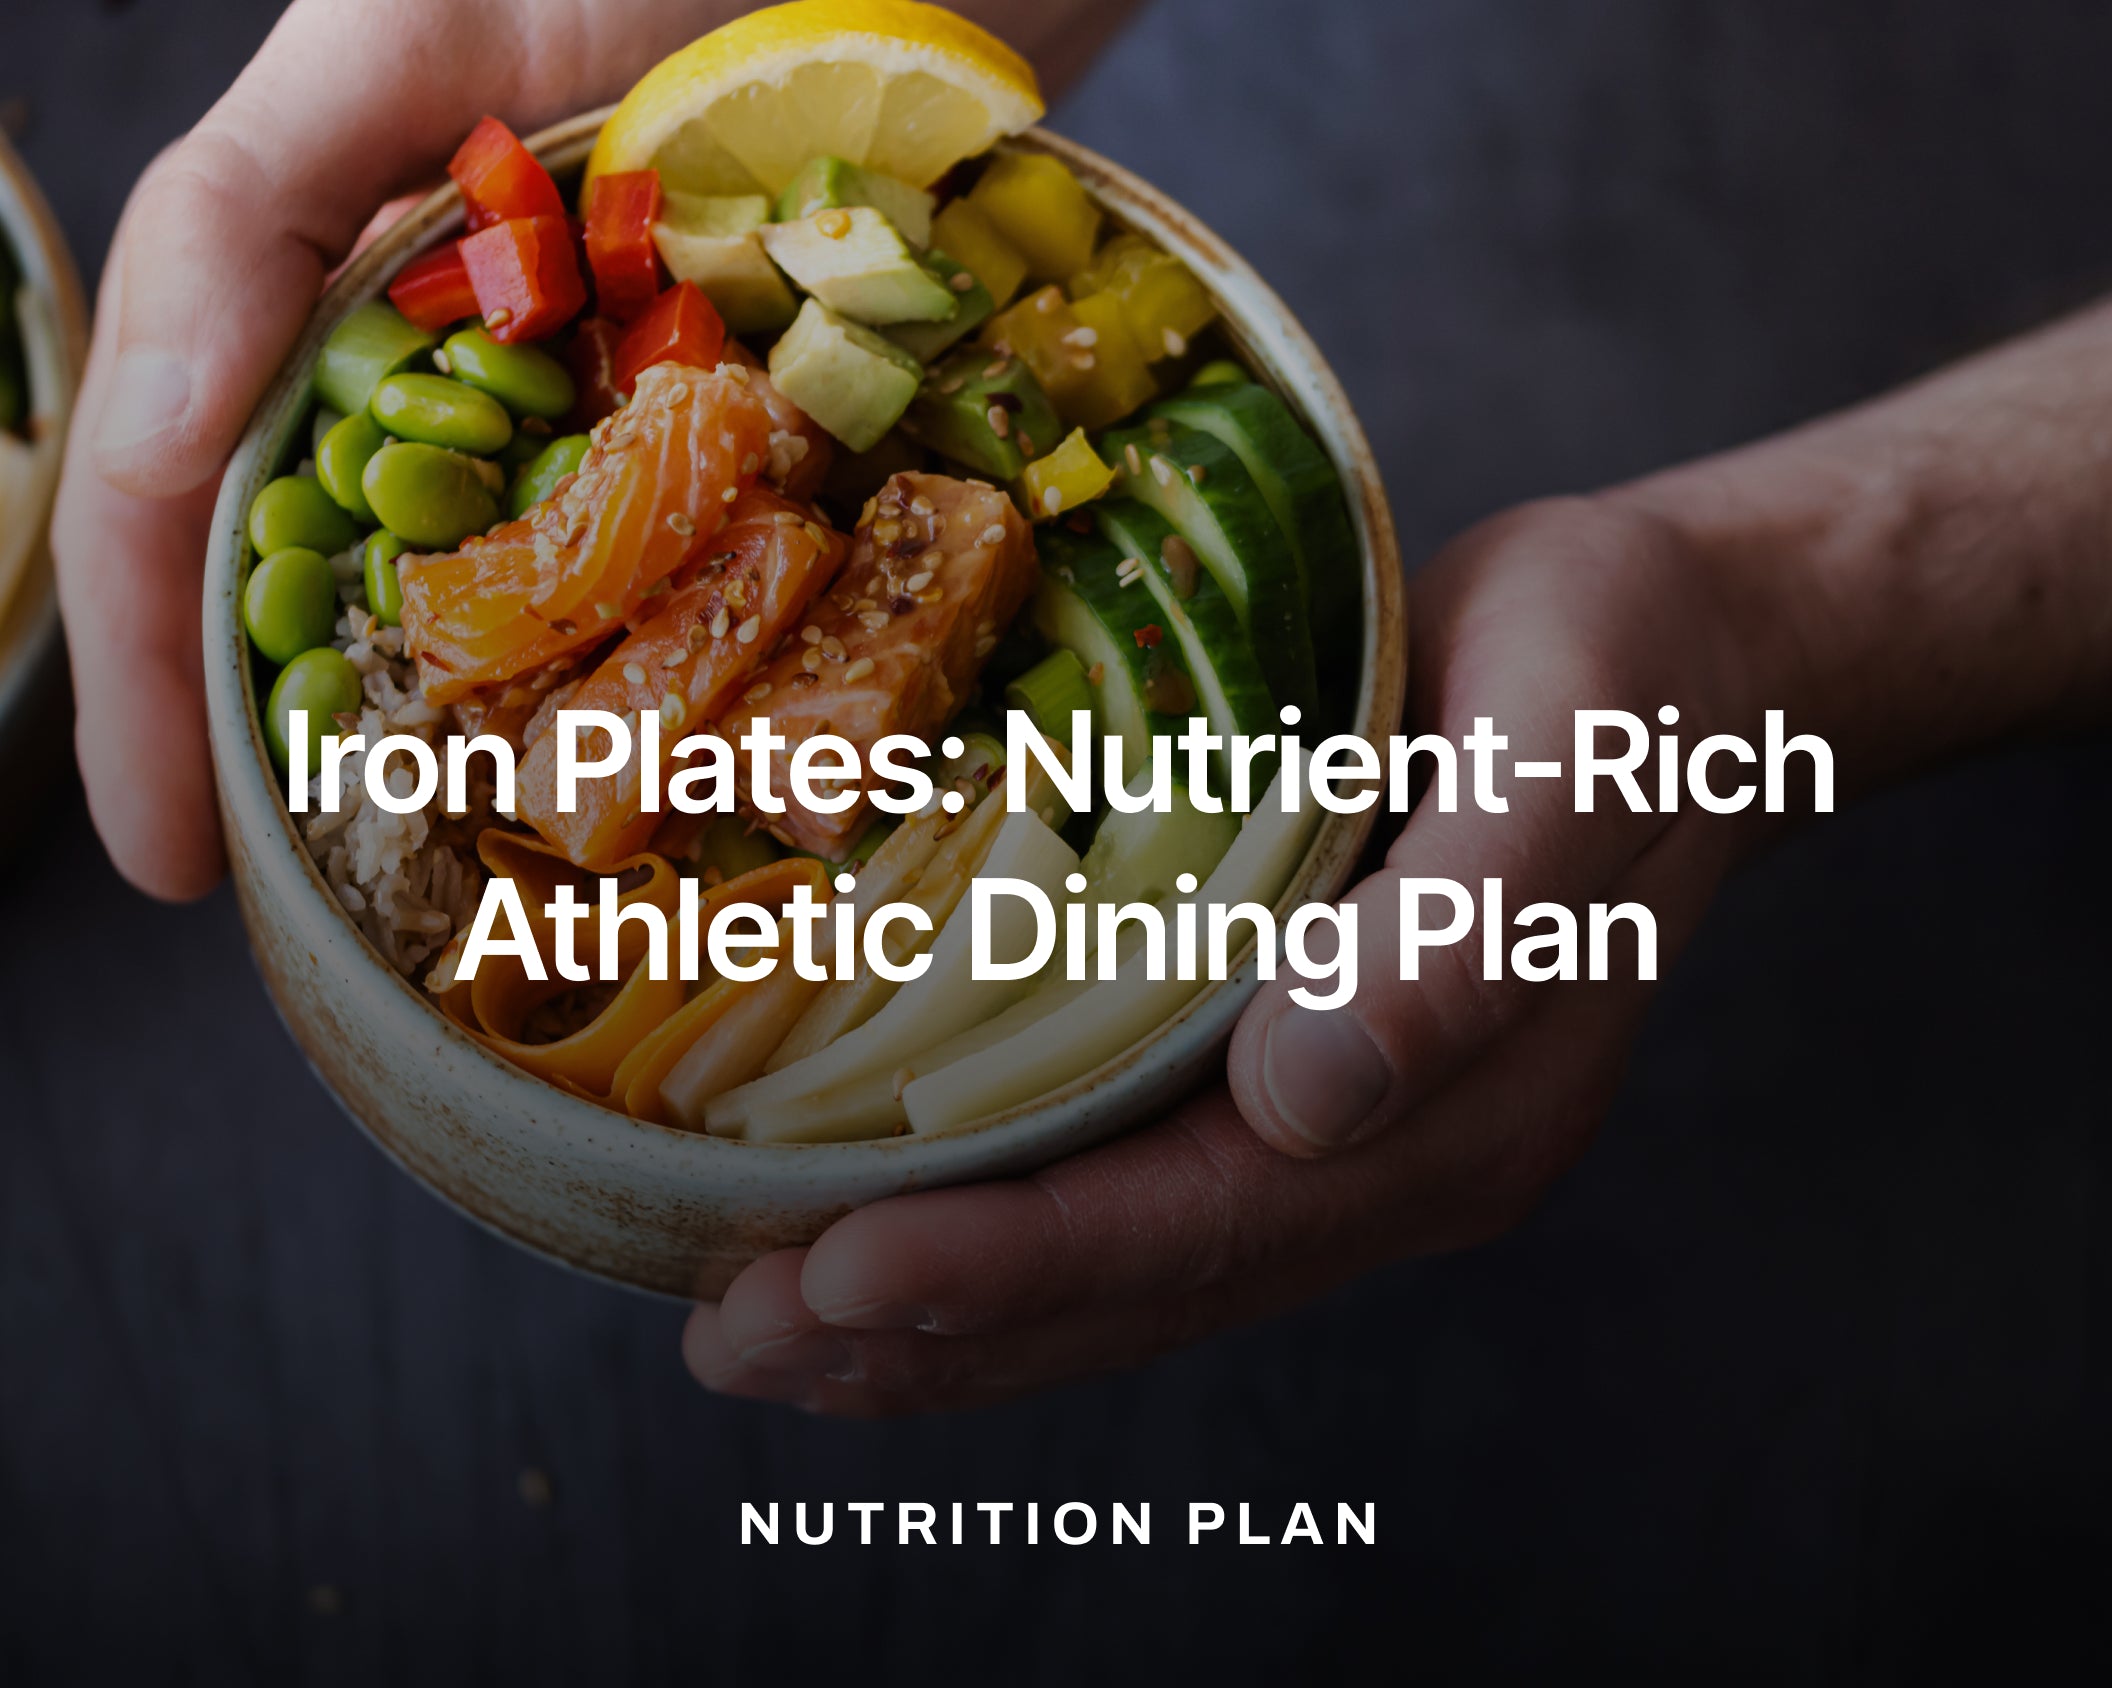 Iron Plates: Nutrient-Rich Athletic Dining Plan